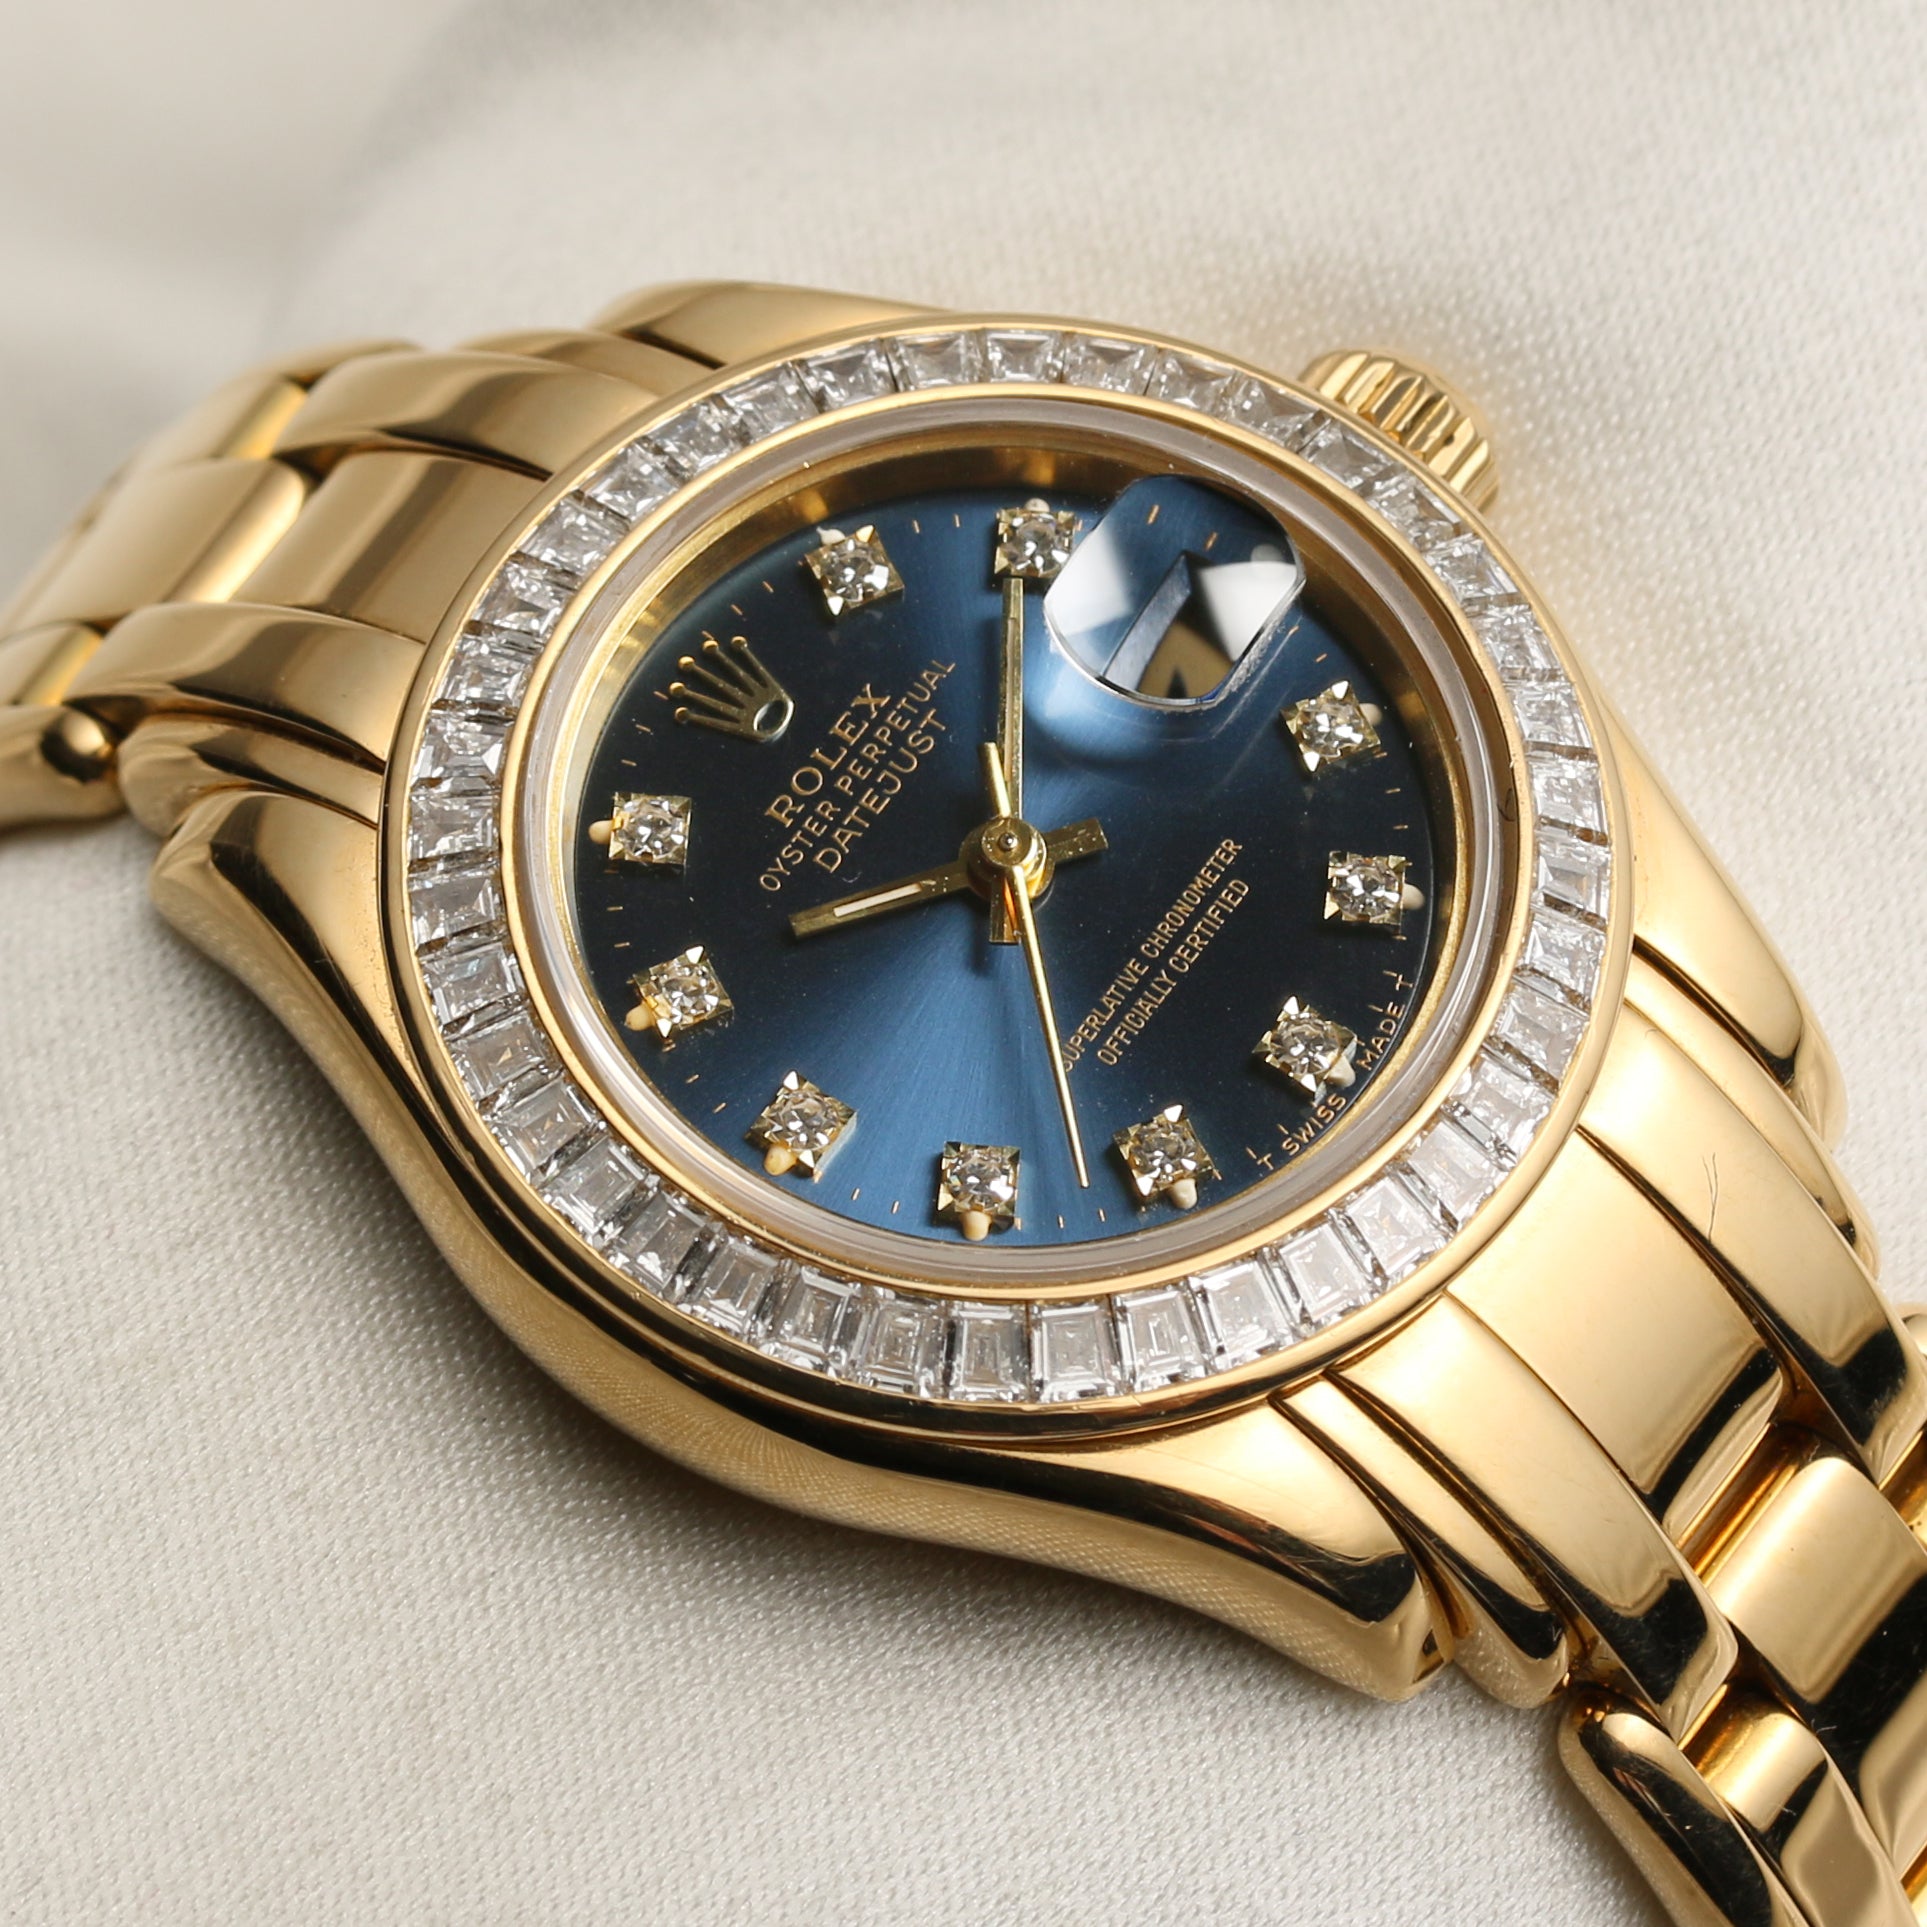 Rolex Lady DateJust PearlMaster 69308 18k Yellow Gold Champagne Diamon –  Watch Collectors